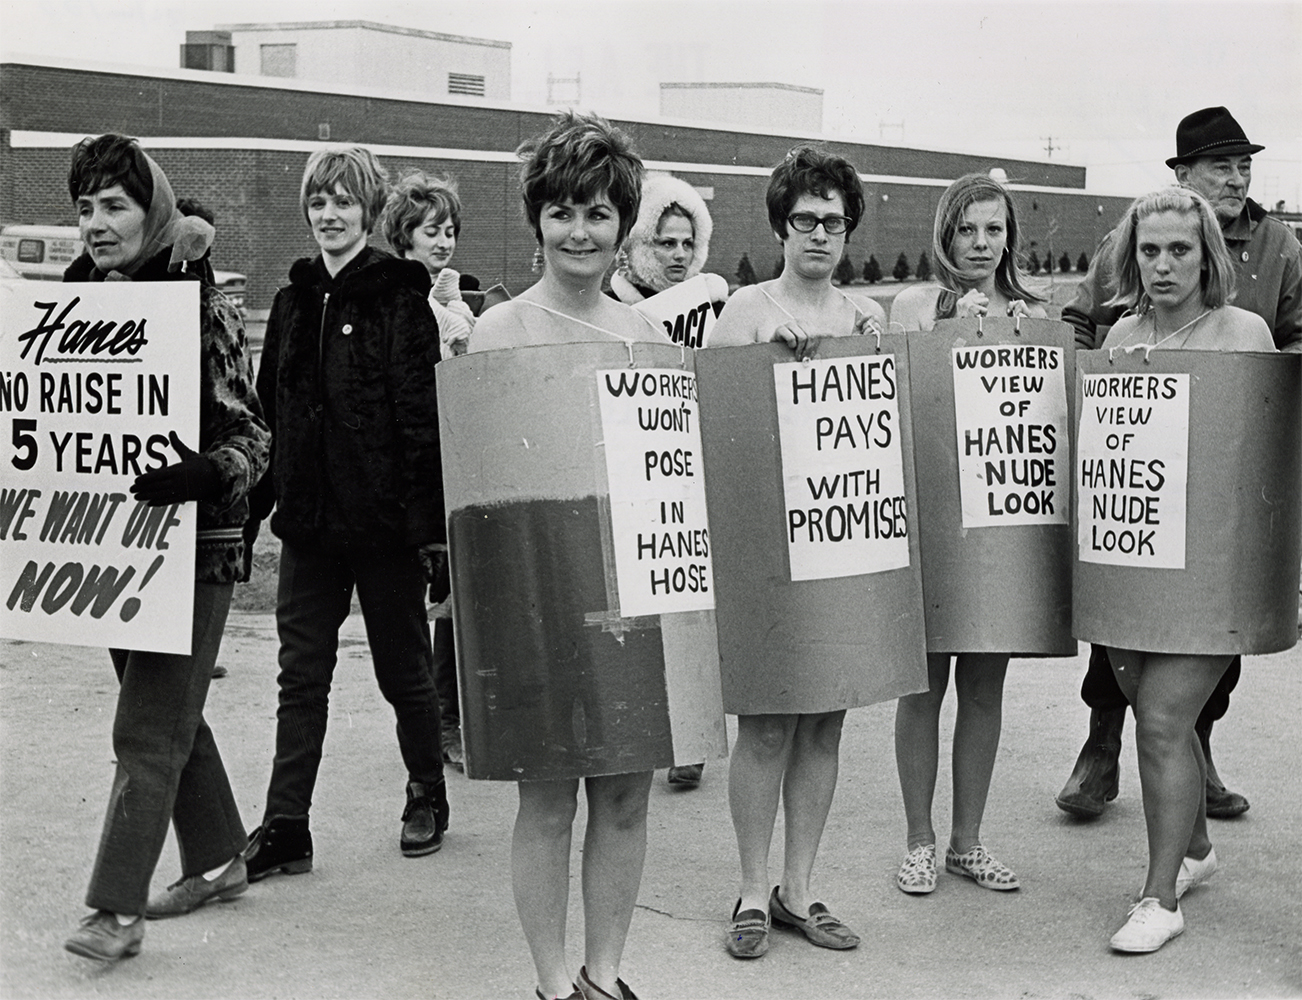 Picketing strikers protest low wages and the gendered irony of their employer’s “Nude Look” advertising brand of hosiery, Textile Workers Union of America